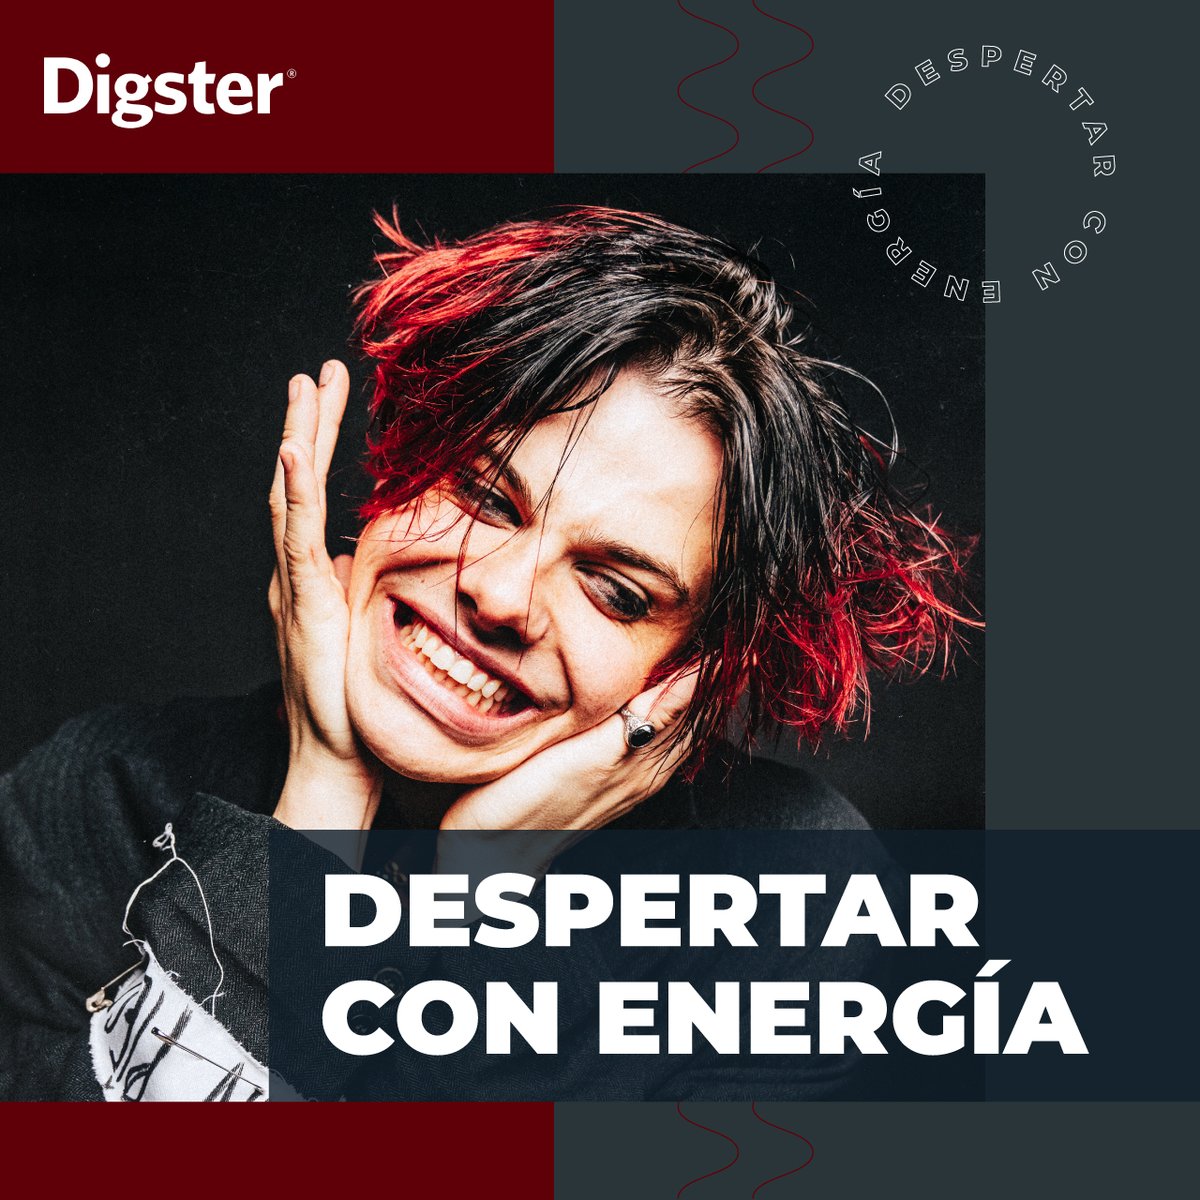 DigsterMexico tweet picture